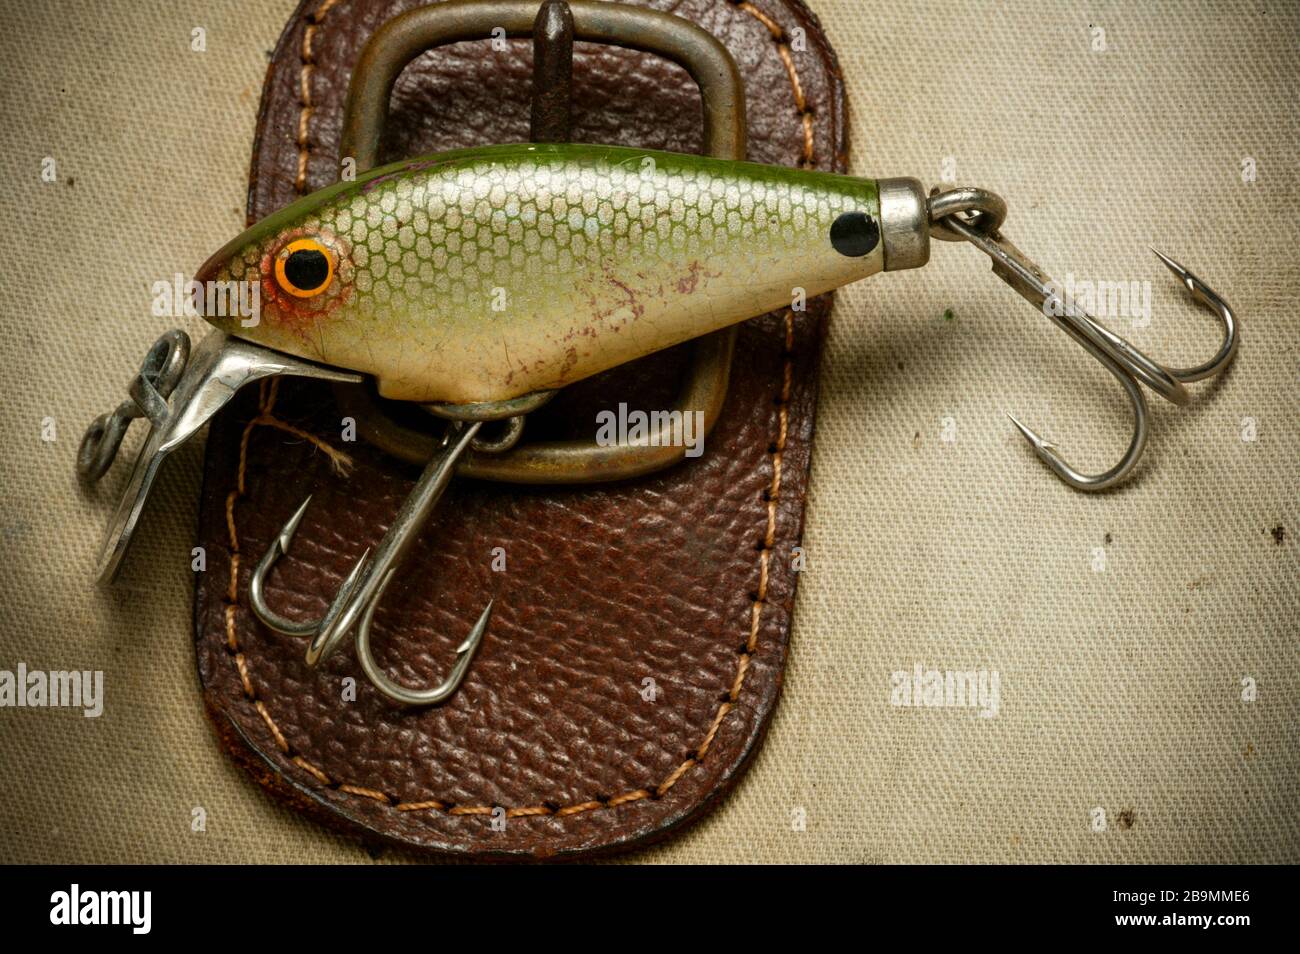 https://c8.alamy.com/comp/2B9MME6/an-example-of-a-vintage-fishing-lure-equipped-with-treble-hooks-possibly-made-by-woods-mfg-displayed-on-an-old-fishing-bag-lures-such-as-these-are-2B9MME6.jpg